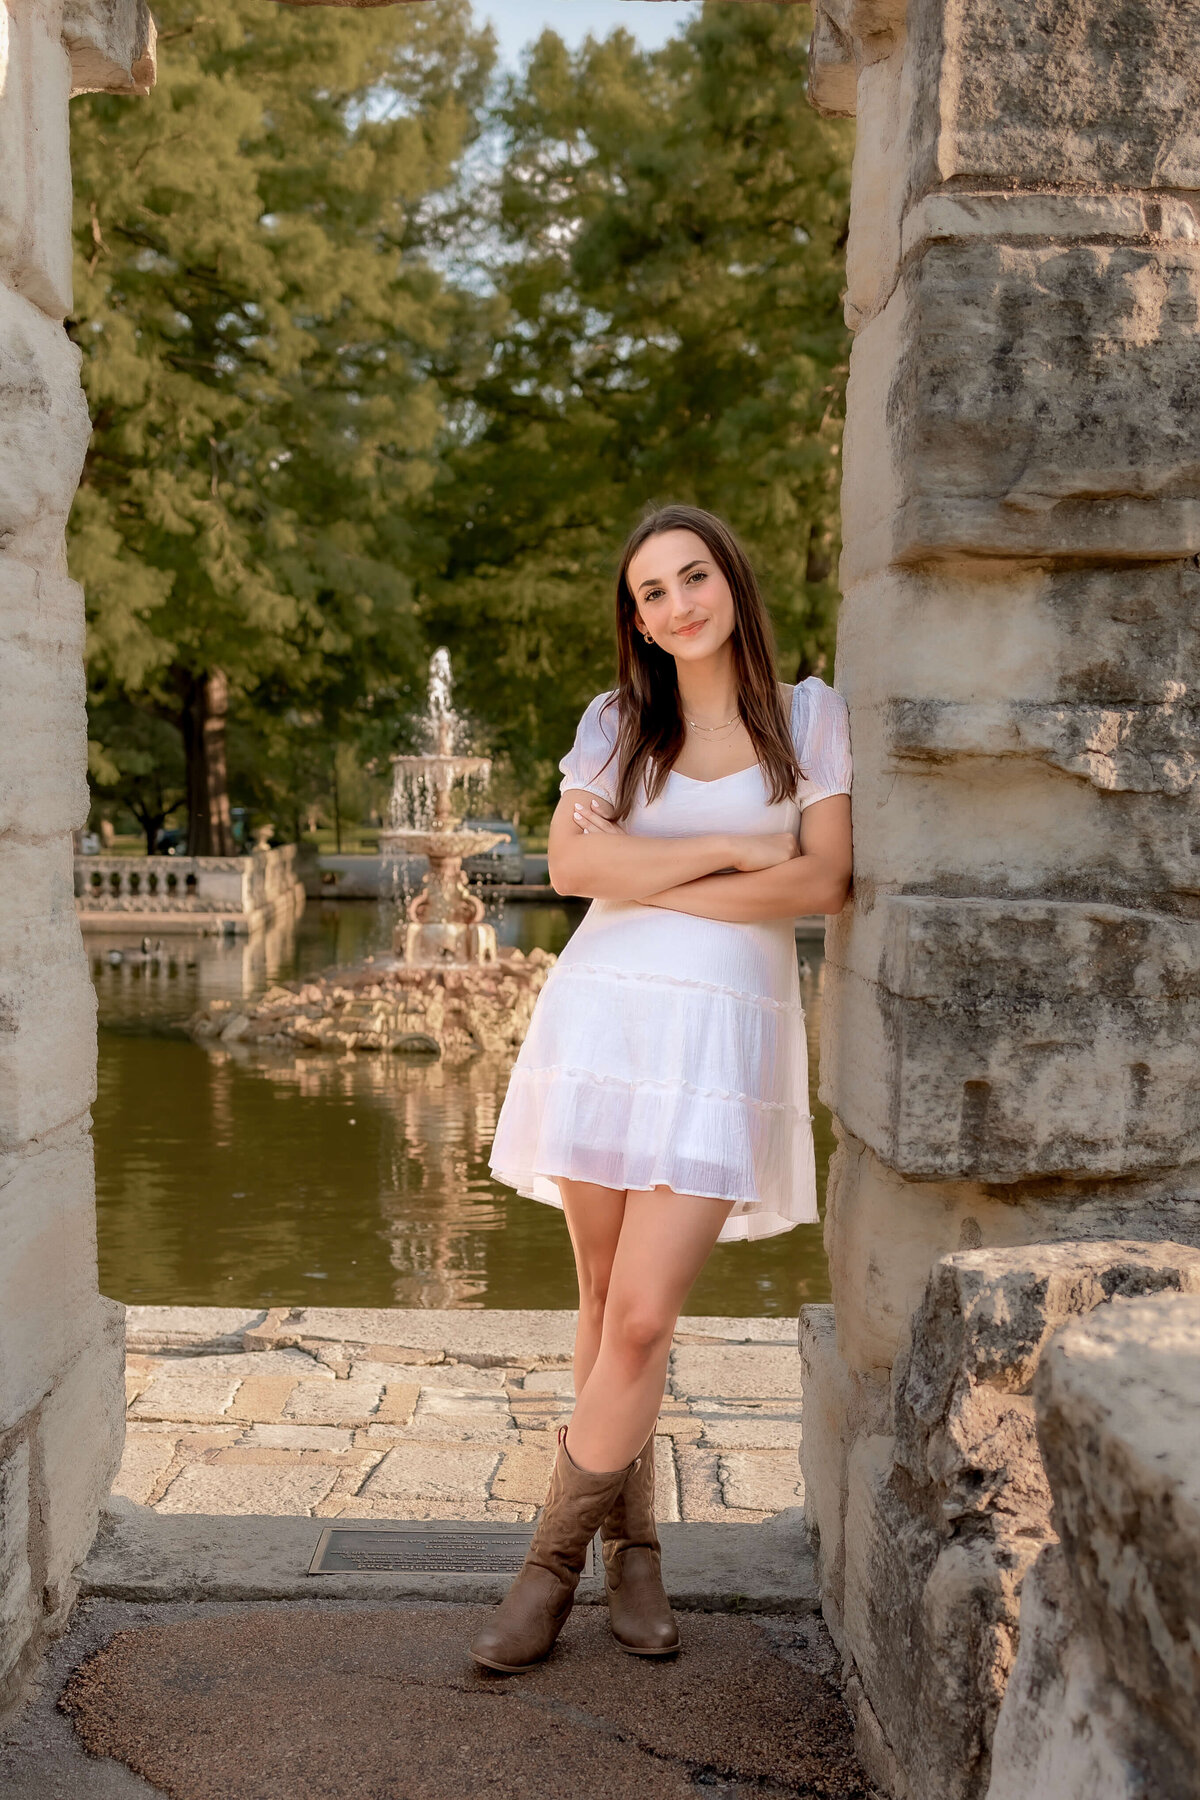 A high school senior is posing against a stone wall with a water fountain in the distance beind her.